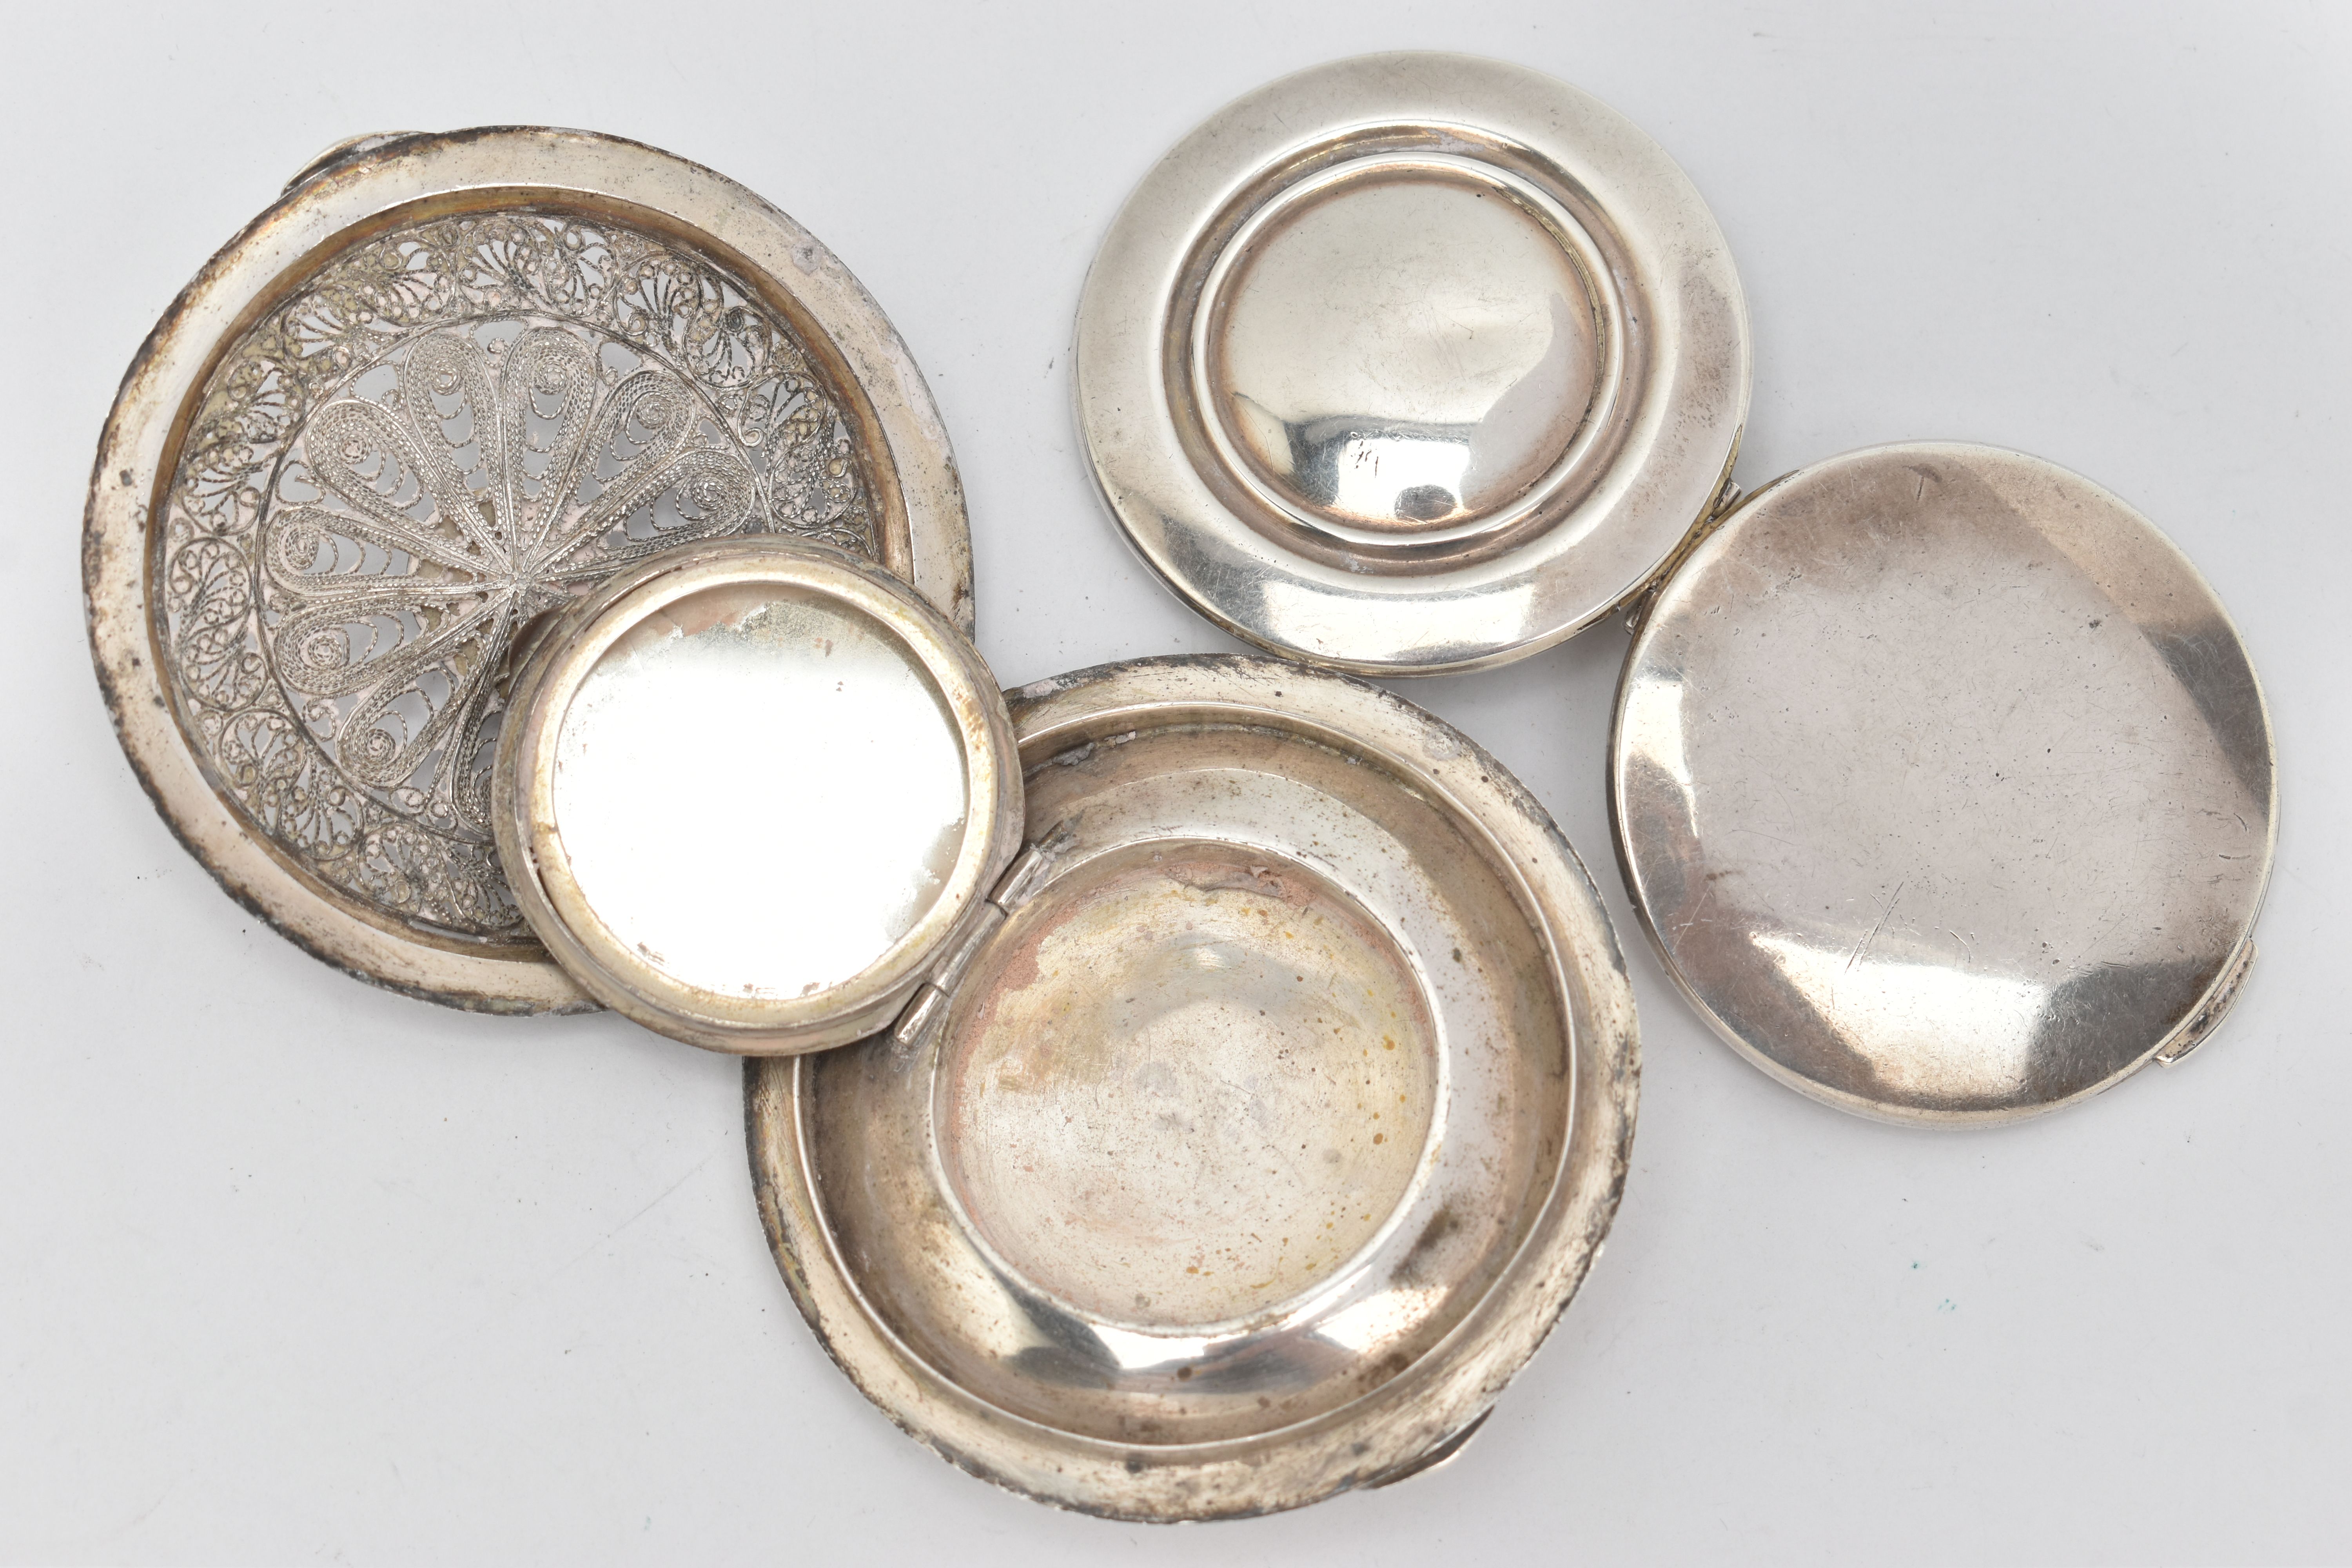 TWO COMPACTS, to include a silver 'Kigu' round polished compact, hallmarked 'Kigu Ltd' Birmingham - Image 4 of 4